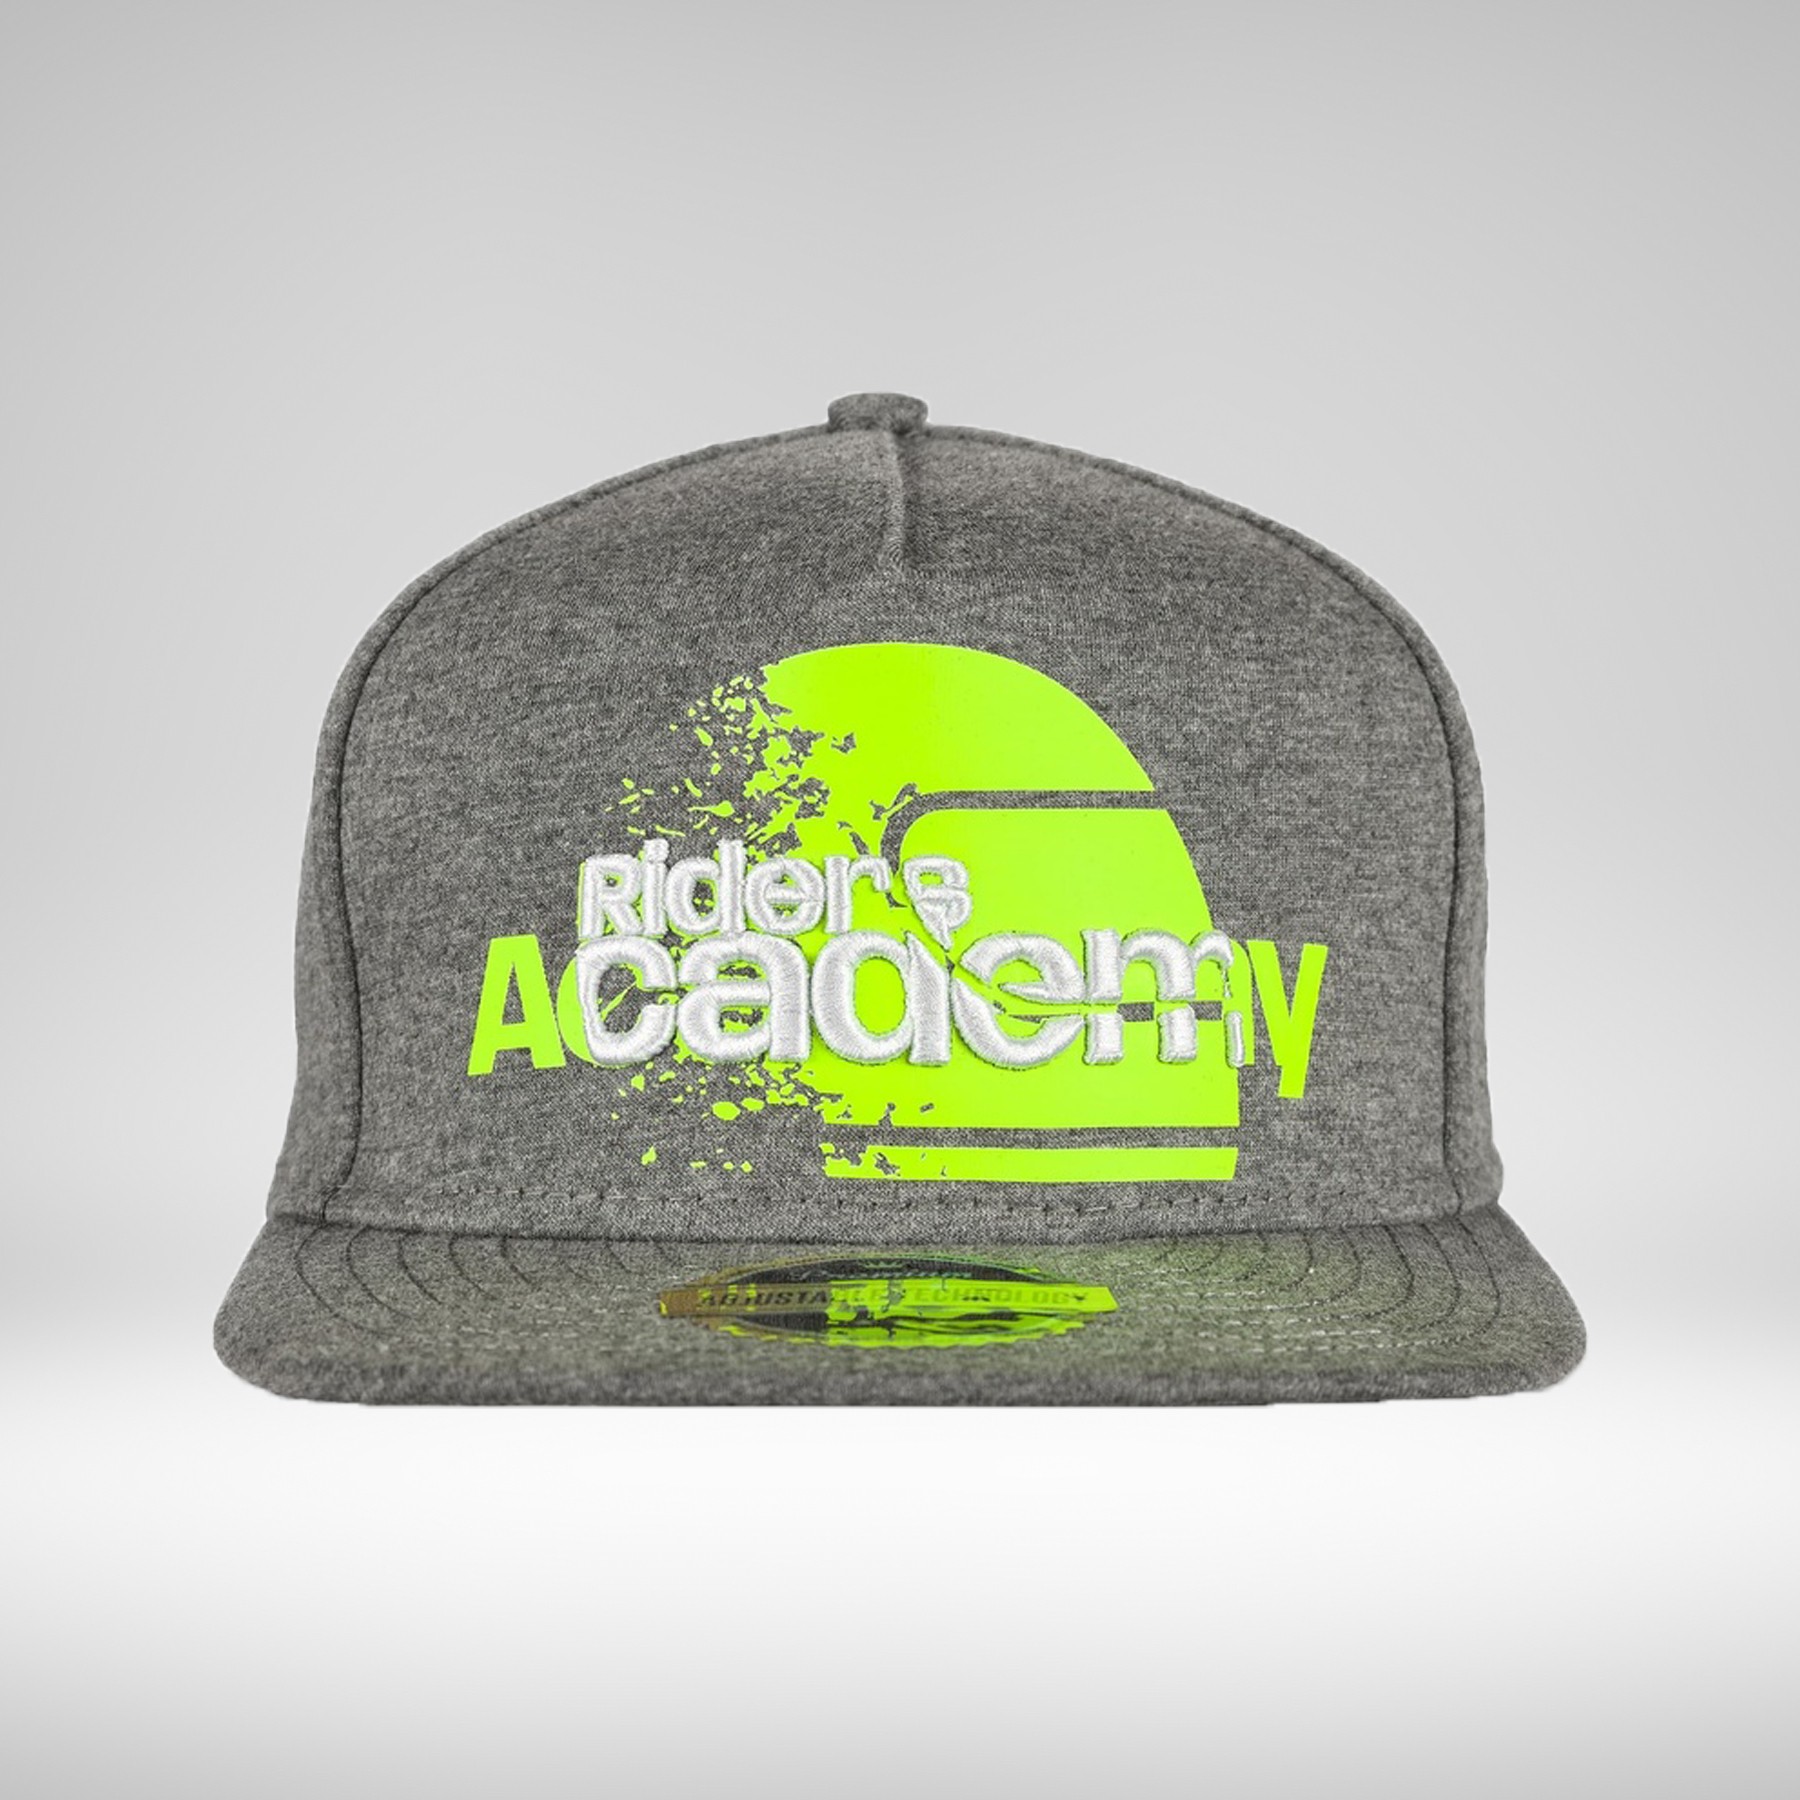 Casquette VR46 Ongoing Riders Academy Couleur